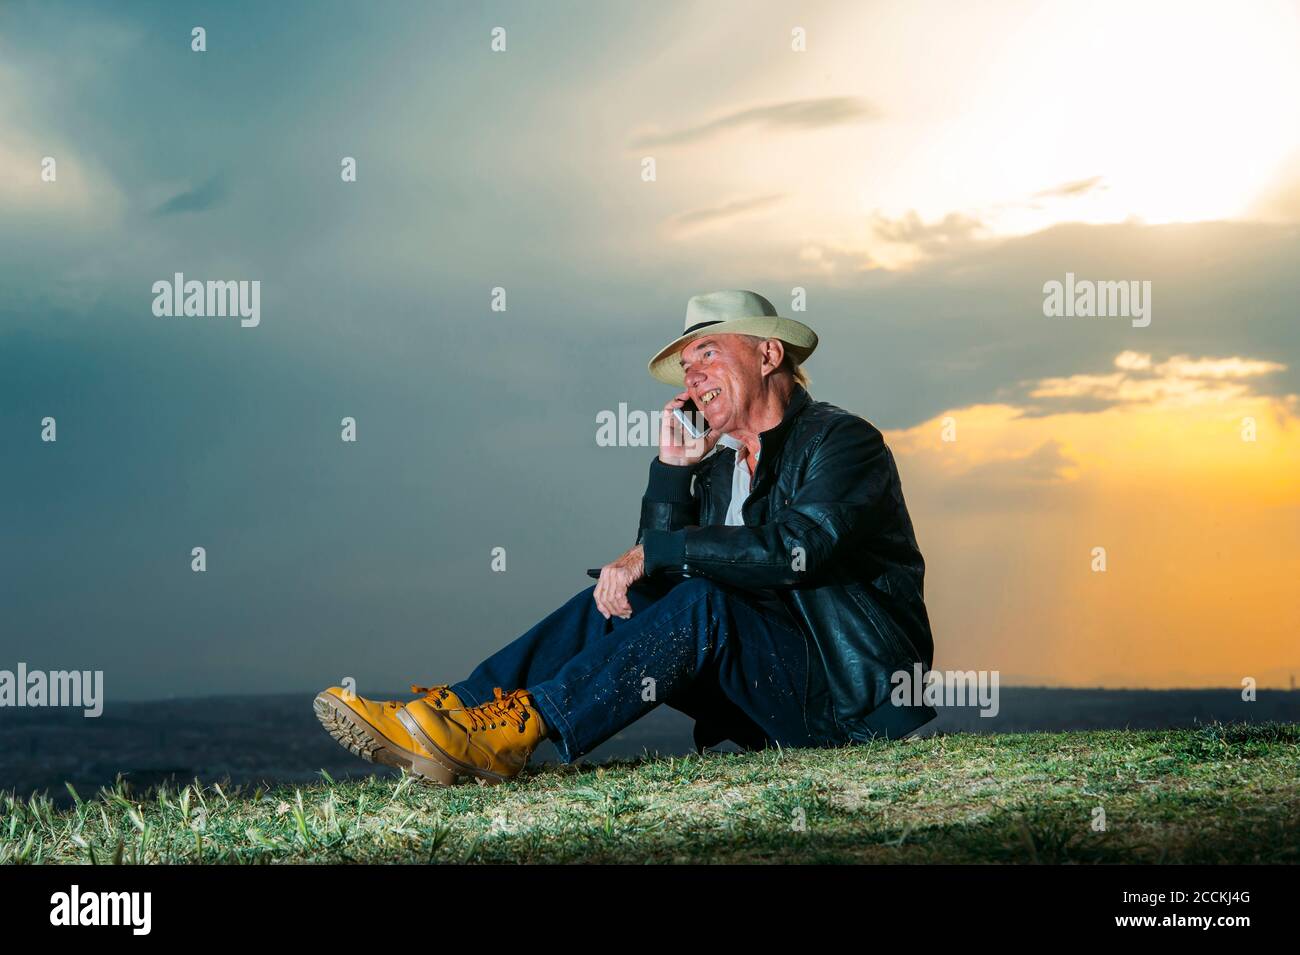 Smiling senior man talking on mobile phone against cloudy sky during sunset Stock Photo